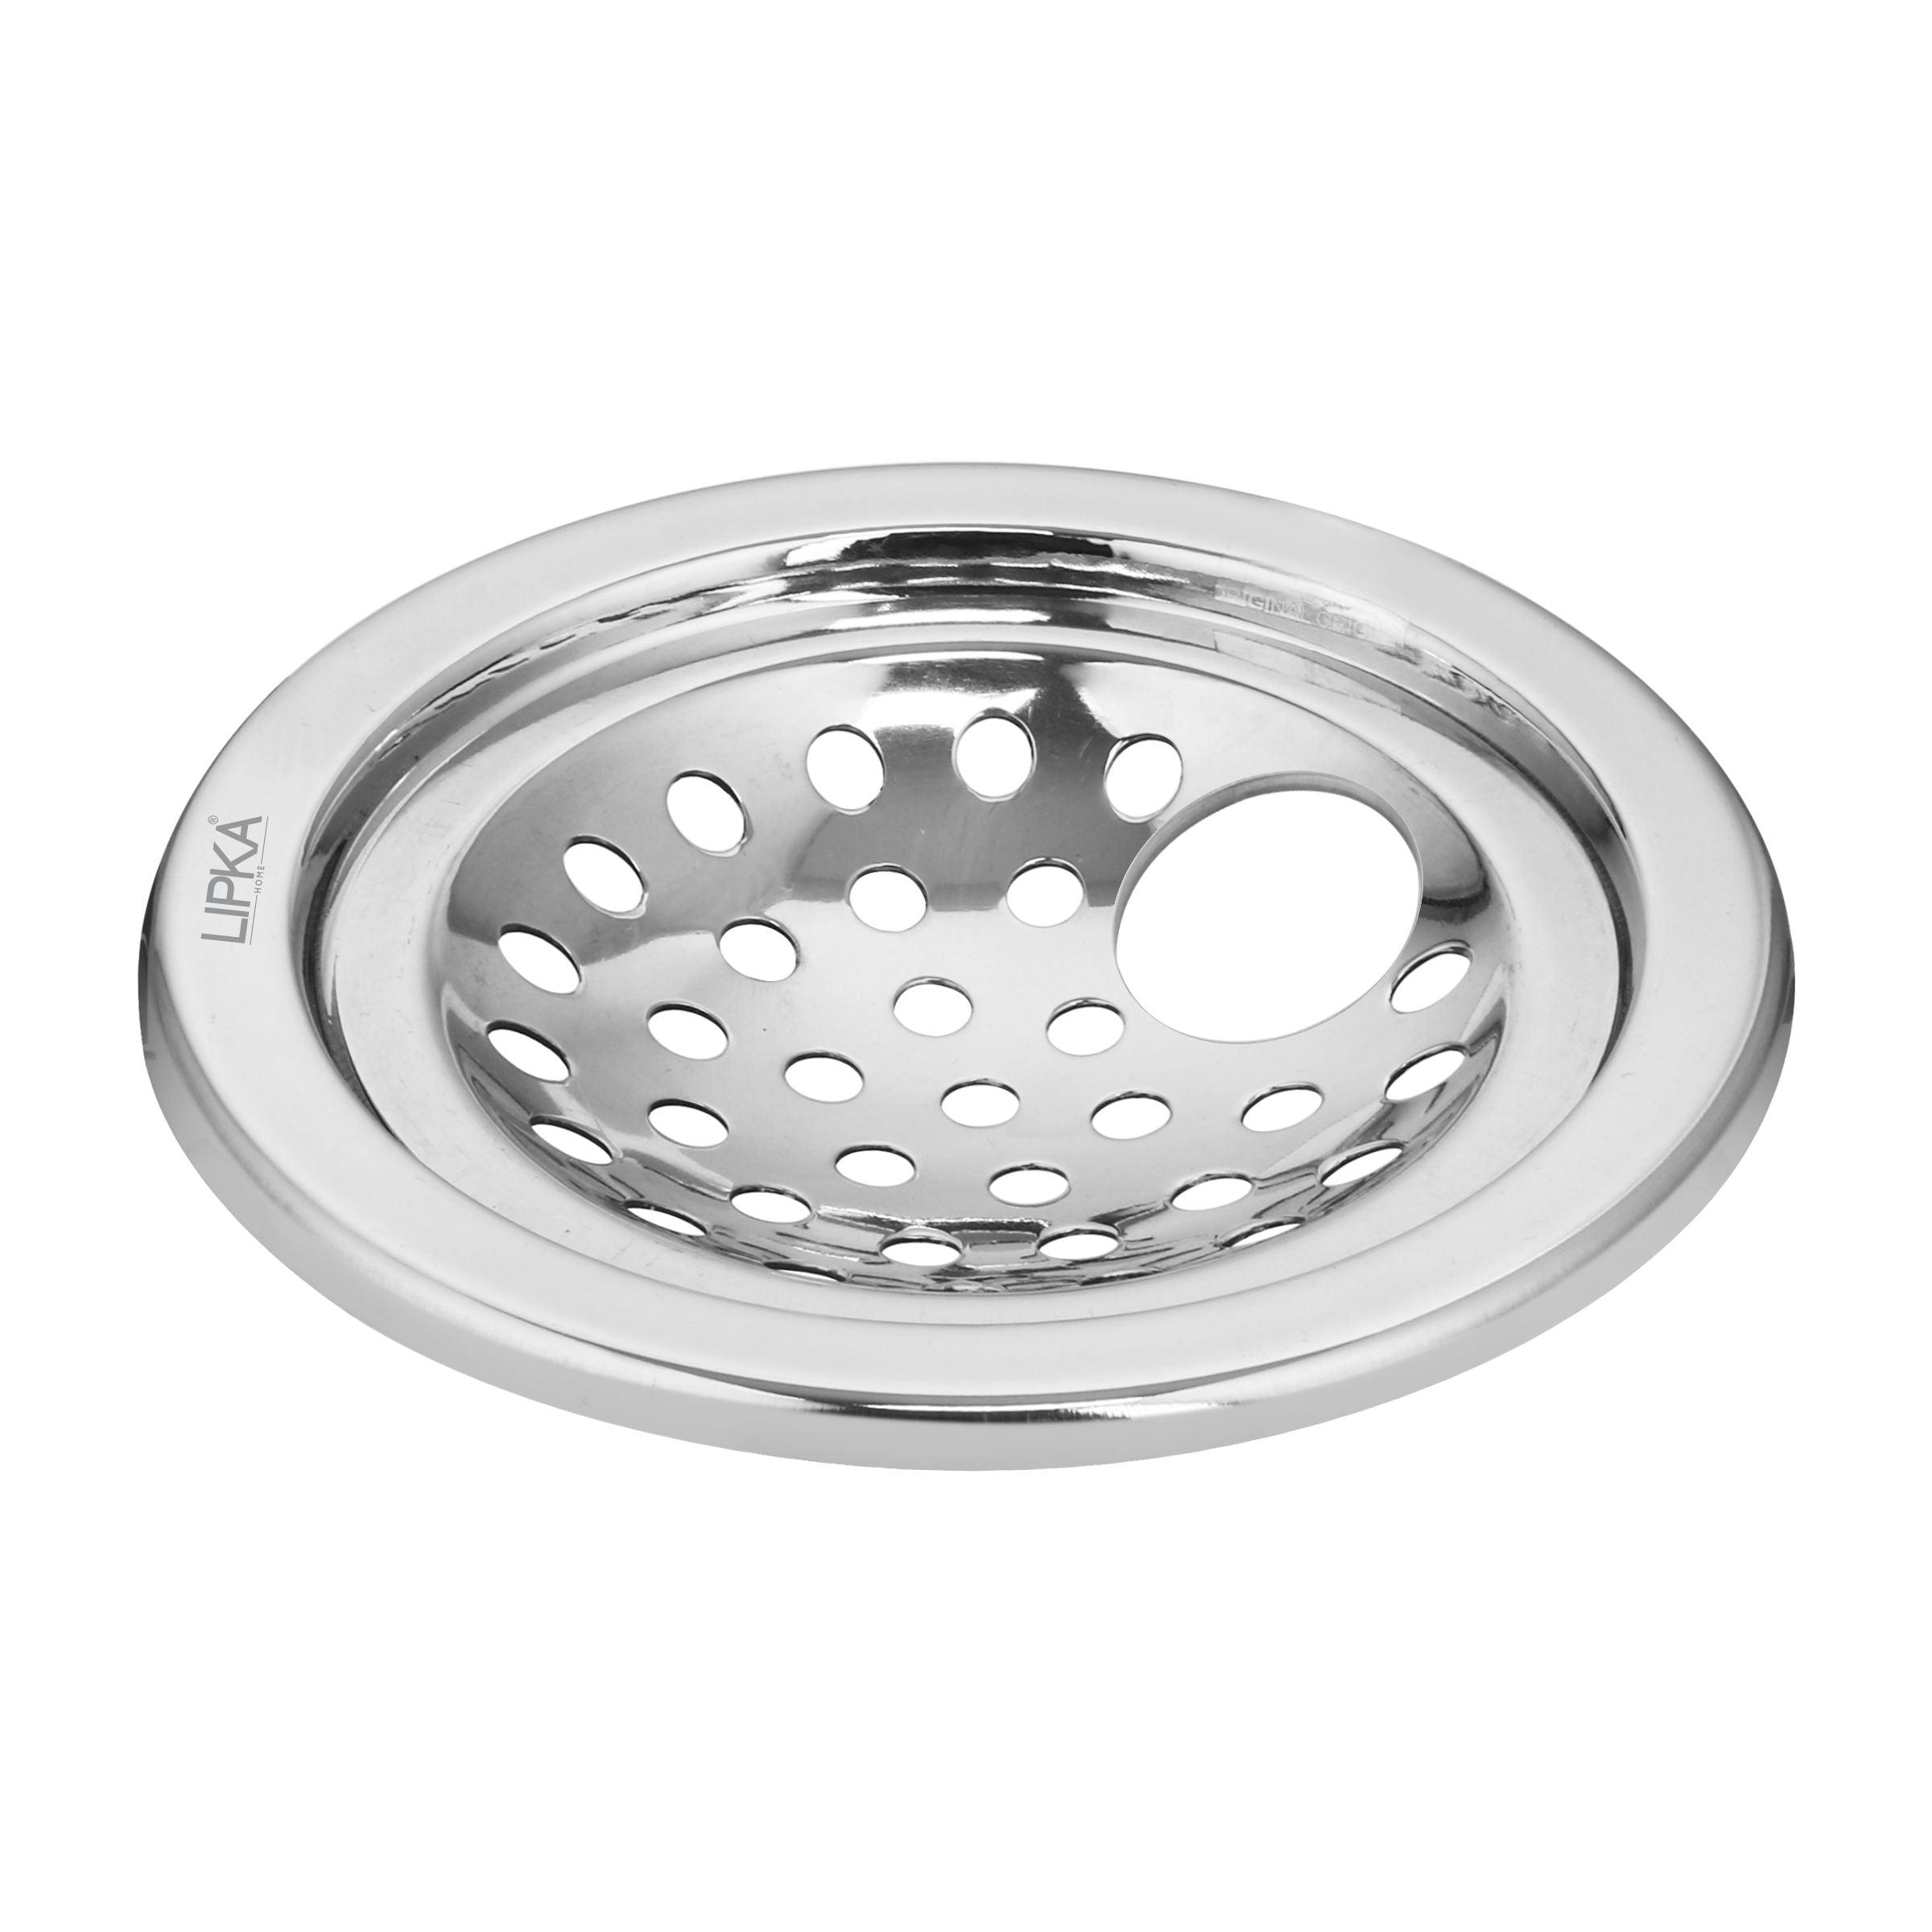 EON Round Floor Drain with Hole (5 inches)